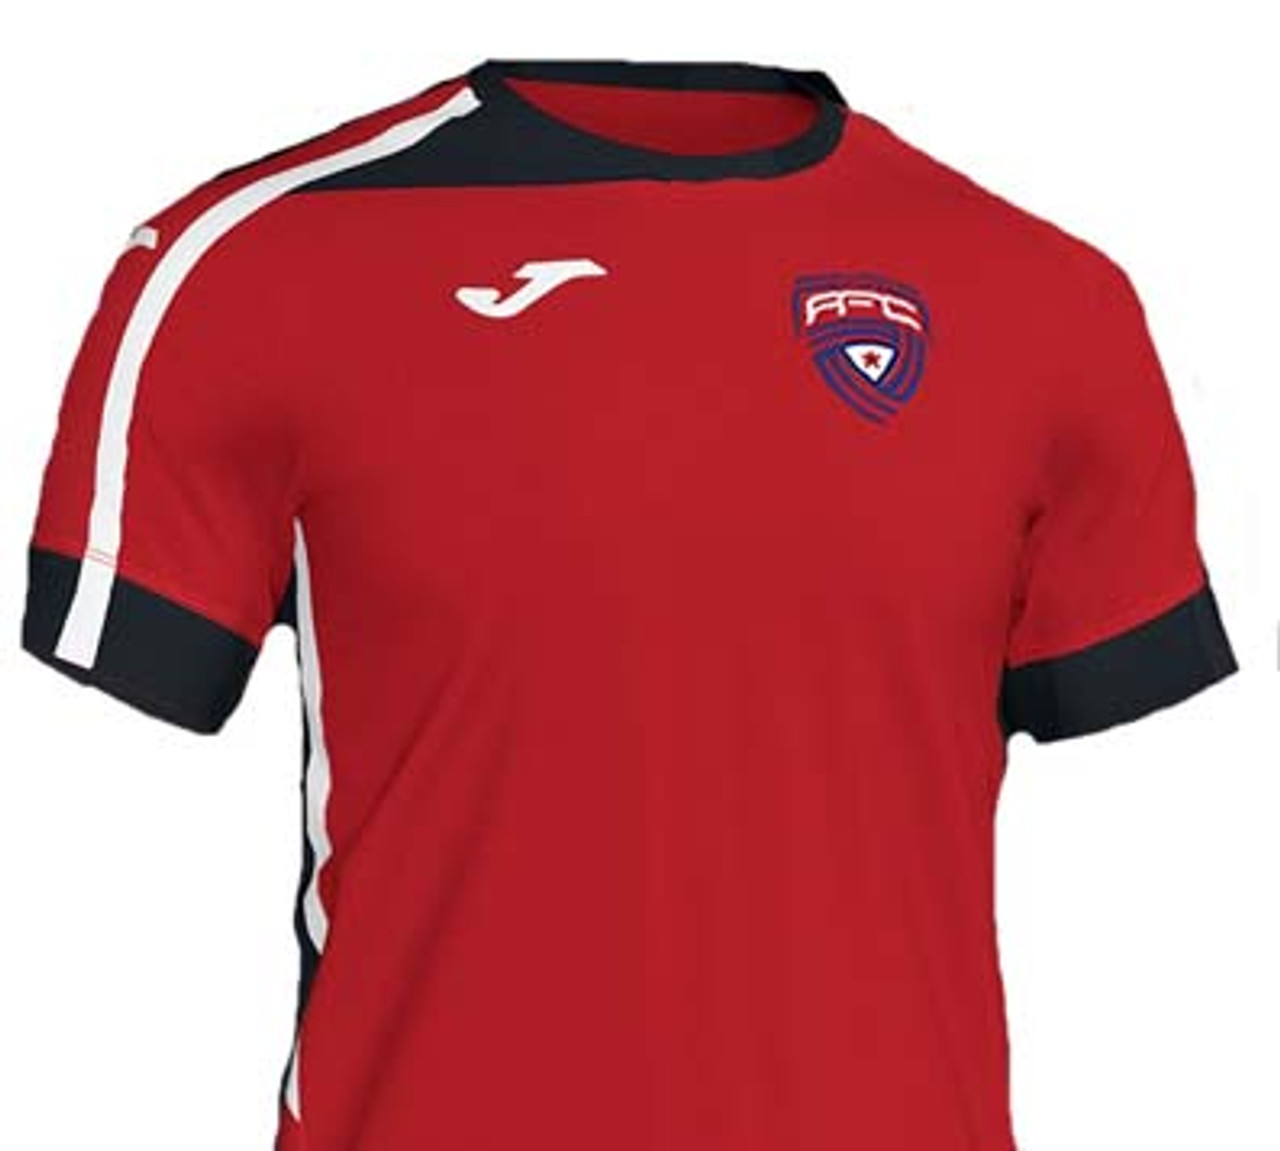 JOMA CUBA 2019 HOME JERSEY RED - Soccer 